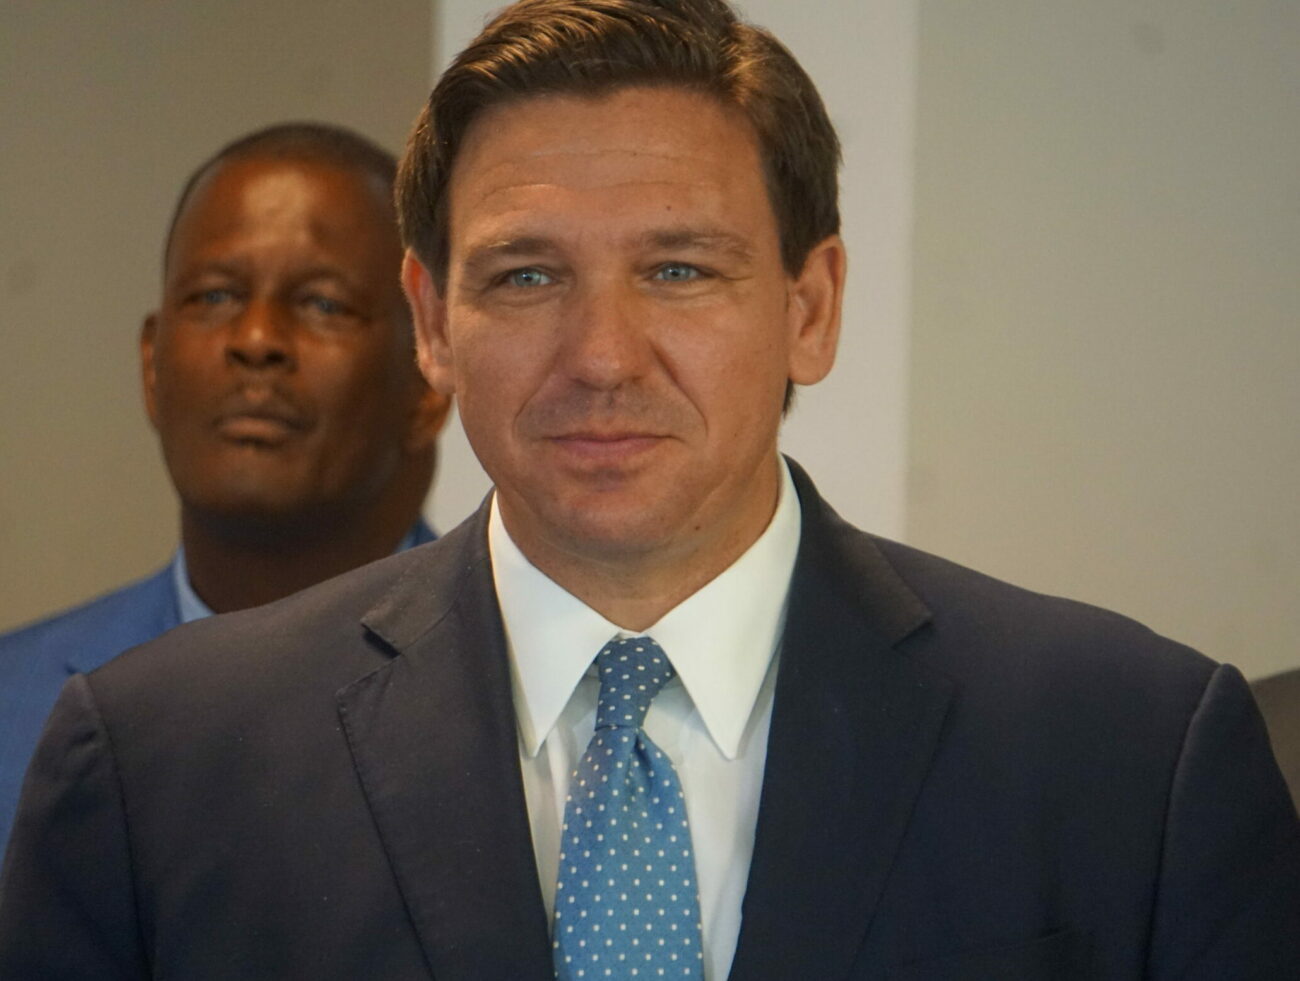 Gov. DeSantis Outpaces Democratic Field in Donations Ahead of 2022